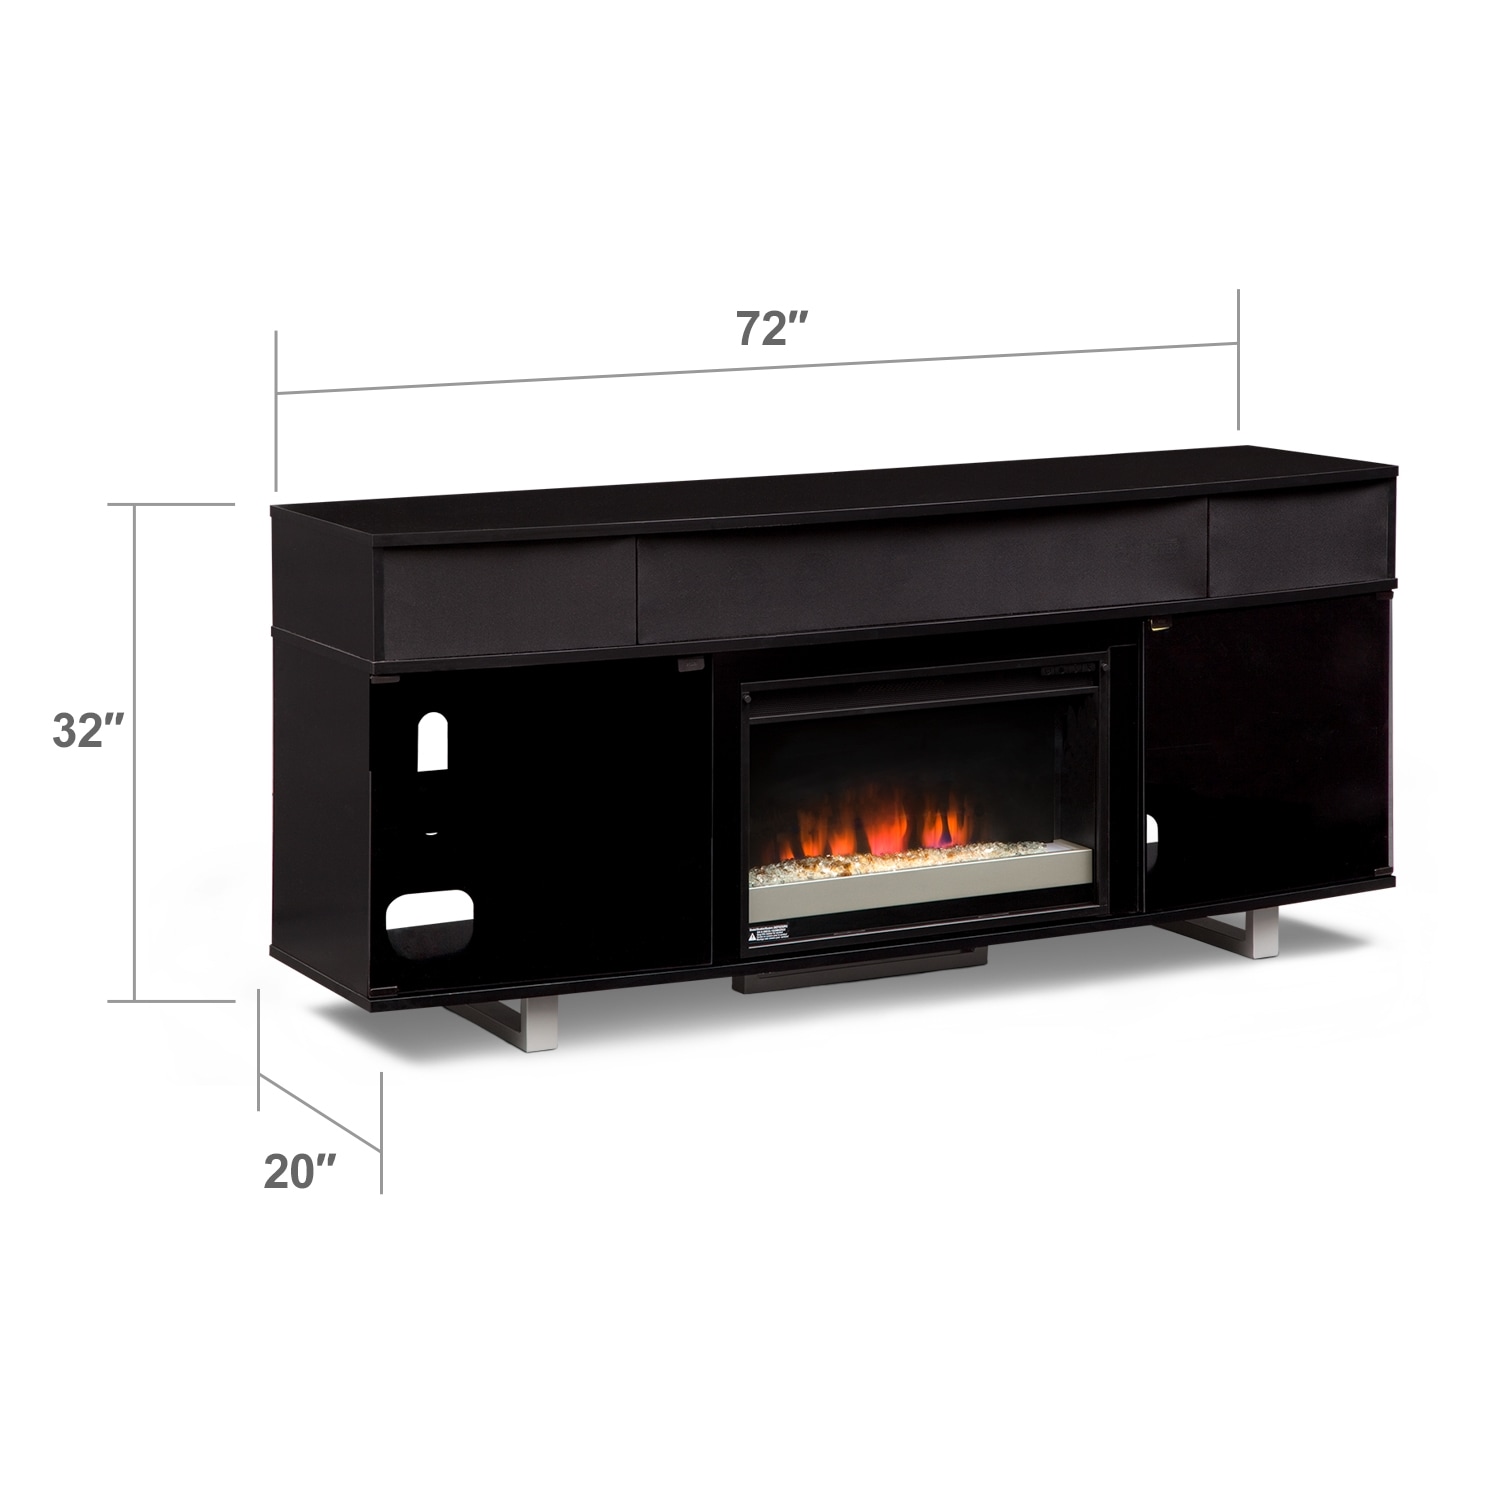  Wall Units Fireplace TV Stand with Sound Bar - Value City Furniture